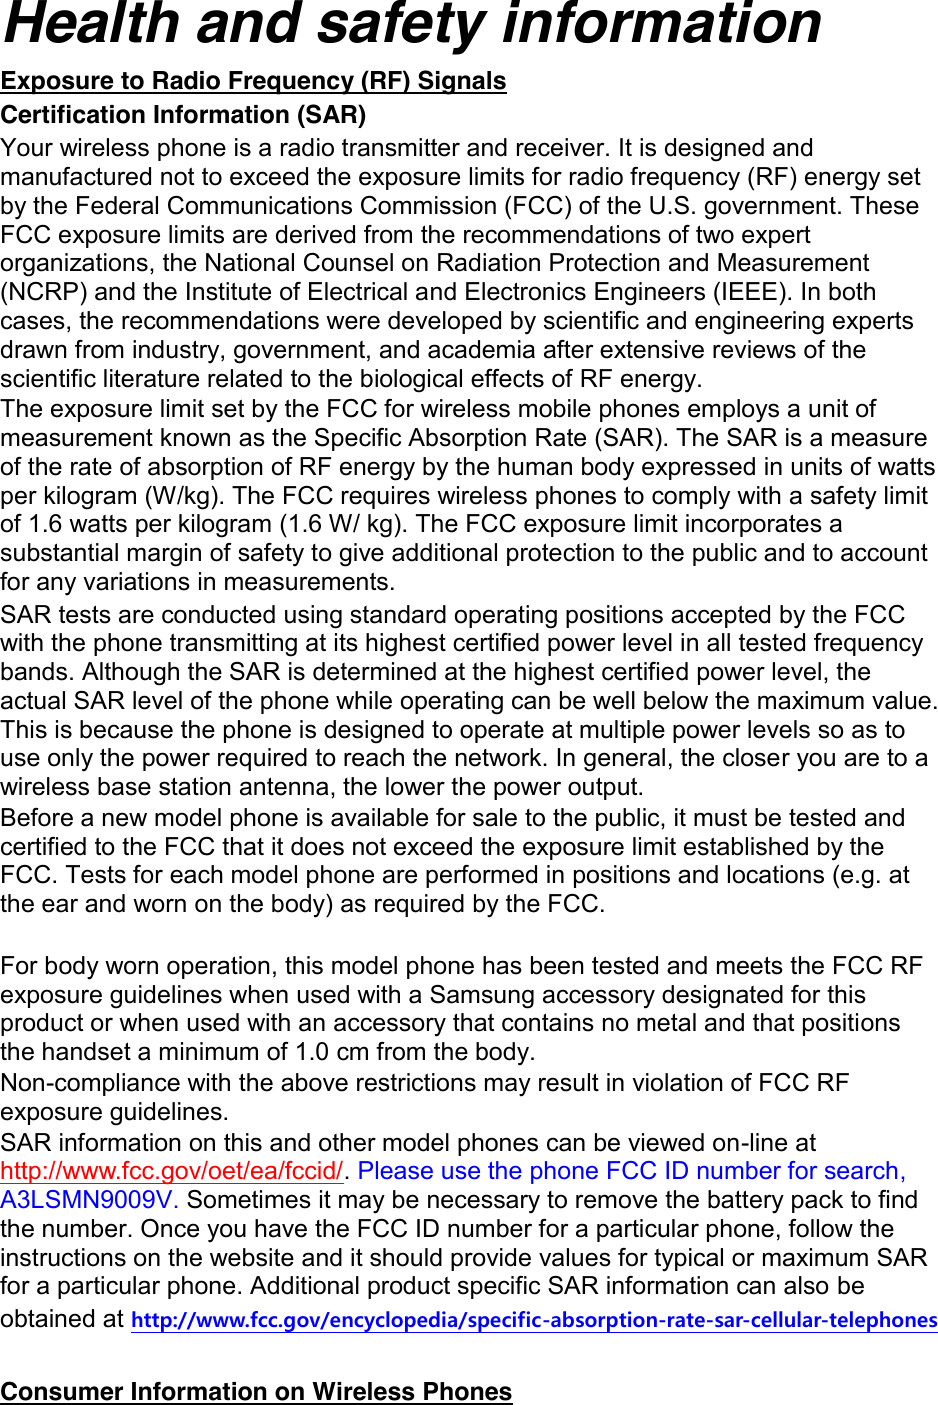 Health and safety information Exposure to Radio Frequency (RF) Signals Certification Information (SAR) Your wireless phone is a radio transmitter and receiver. It is designed and manufactured not to exceed the exposure limits for radio frequency (RF) energy set by the Federal Communications Commission (FCC) of the U.S. government. These FCC exposure limits are derived from the recommendations of two expert organizations, the National Counsel on Radiation Protection and Measurement (NCRP) and the Institute of Electrical and Electronics Engineers (IEEE). In both cases, the recommendations were developed by scientific and engineering experts drawn from industry, government, and academia after extensive reviews of the scientific literature related to the biological effects of RF energy. The exposure limit set by the FCC for wireless mobile phones employs a unit of measurement known as the Specific Absorption Rate (SAR). The SAR is a measure of the rate of absorption of RF energy by the human body expressed in units of watts per kilogram (W/kg). The FCC requires wireless phones to comply with a safety limit of 1.6 watts per kilogram (1.6 W/ kg). The FCC exposure limit incorporates a substantial margin of safety to give additional protection to the public and to account for any variations in measurements. SAR tests are conducted using standard operating positions accepted by the FCC with the phone transmitting at its highest certified power level in all tested frequency bands. Although the SAR is determined at the highest certified power level, the actual SAR level of the phone while operating can be well below the maximum value. This is because the phone is designed to operate at multiple power levels so as to use only the power required to reach the network. In general, the closer you are to a wireless base station antenna, the lower the power output. Before a new model phone is available for sale to the public, it must be tested and certified to the FCC that it does not exceed the exposure limit established by the FCC. Tests for each model phone are performed in positions and locations (e.g. at the ear and worn on the body) as required by the FCC.      For body worn operation, this model phone has been tested and meets the FCC RF exposure guidelines when used with a Samsung accessory designated for this product or when used with an accessory that contains no metal and that positions the handset a minimum of 1.0 cm from the body.   Non-compliance with the above restrictions may result in violation of FCC RF exposure guidelines. SAR information on this and other model phones can be viewed on-line at http://www.fcc.gov/oet/ea/fccid/. Please use the phone FCC ID number for search, A3LSMN9009V. Sometimes it may be necessary to remove the battery pack to find the number. Once you have the FCC ID number for a particular phone, follow the instructions on the website and it should provide values for typical or maximum SAR for a particular phone. Additional product specific SAR information can also be obtained at http://www.fcc.gov/encyclopedia/specific-absorption-rate-sar-cellular-telephones  Consumer Information on Wireless Phones 